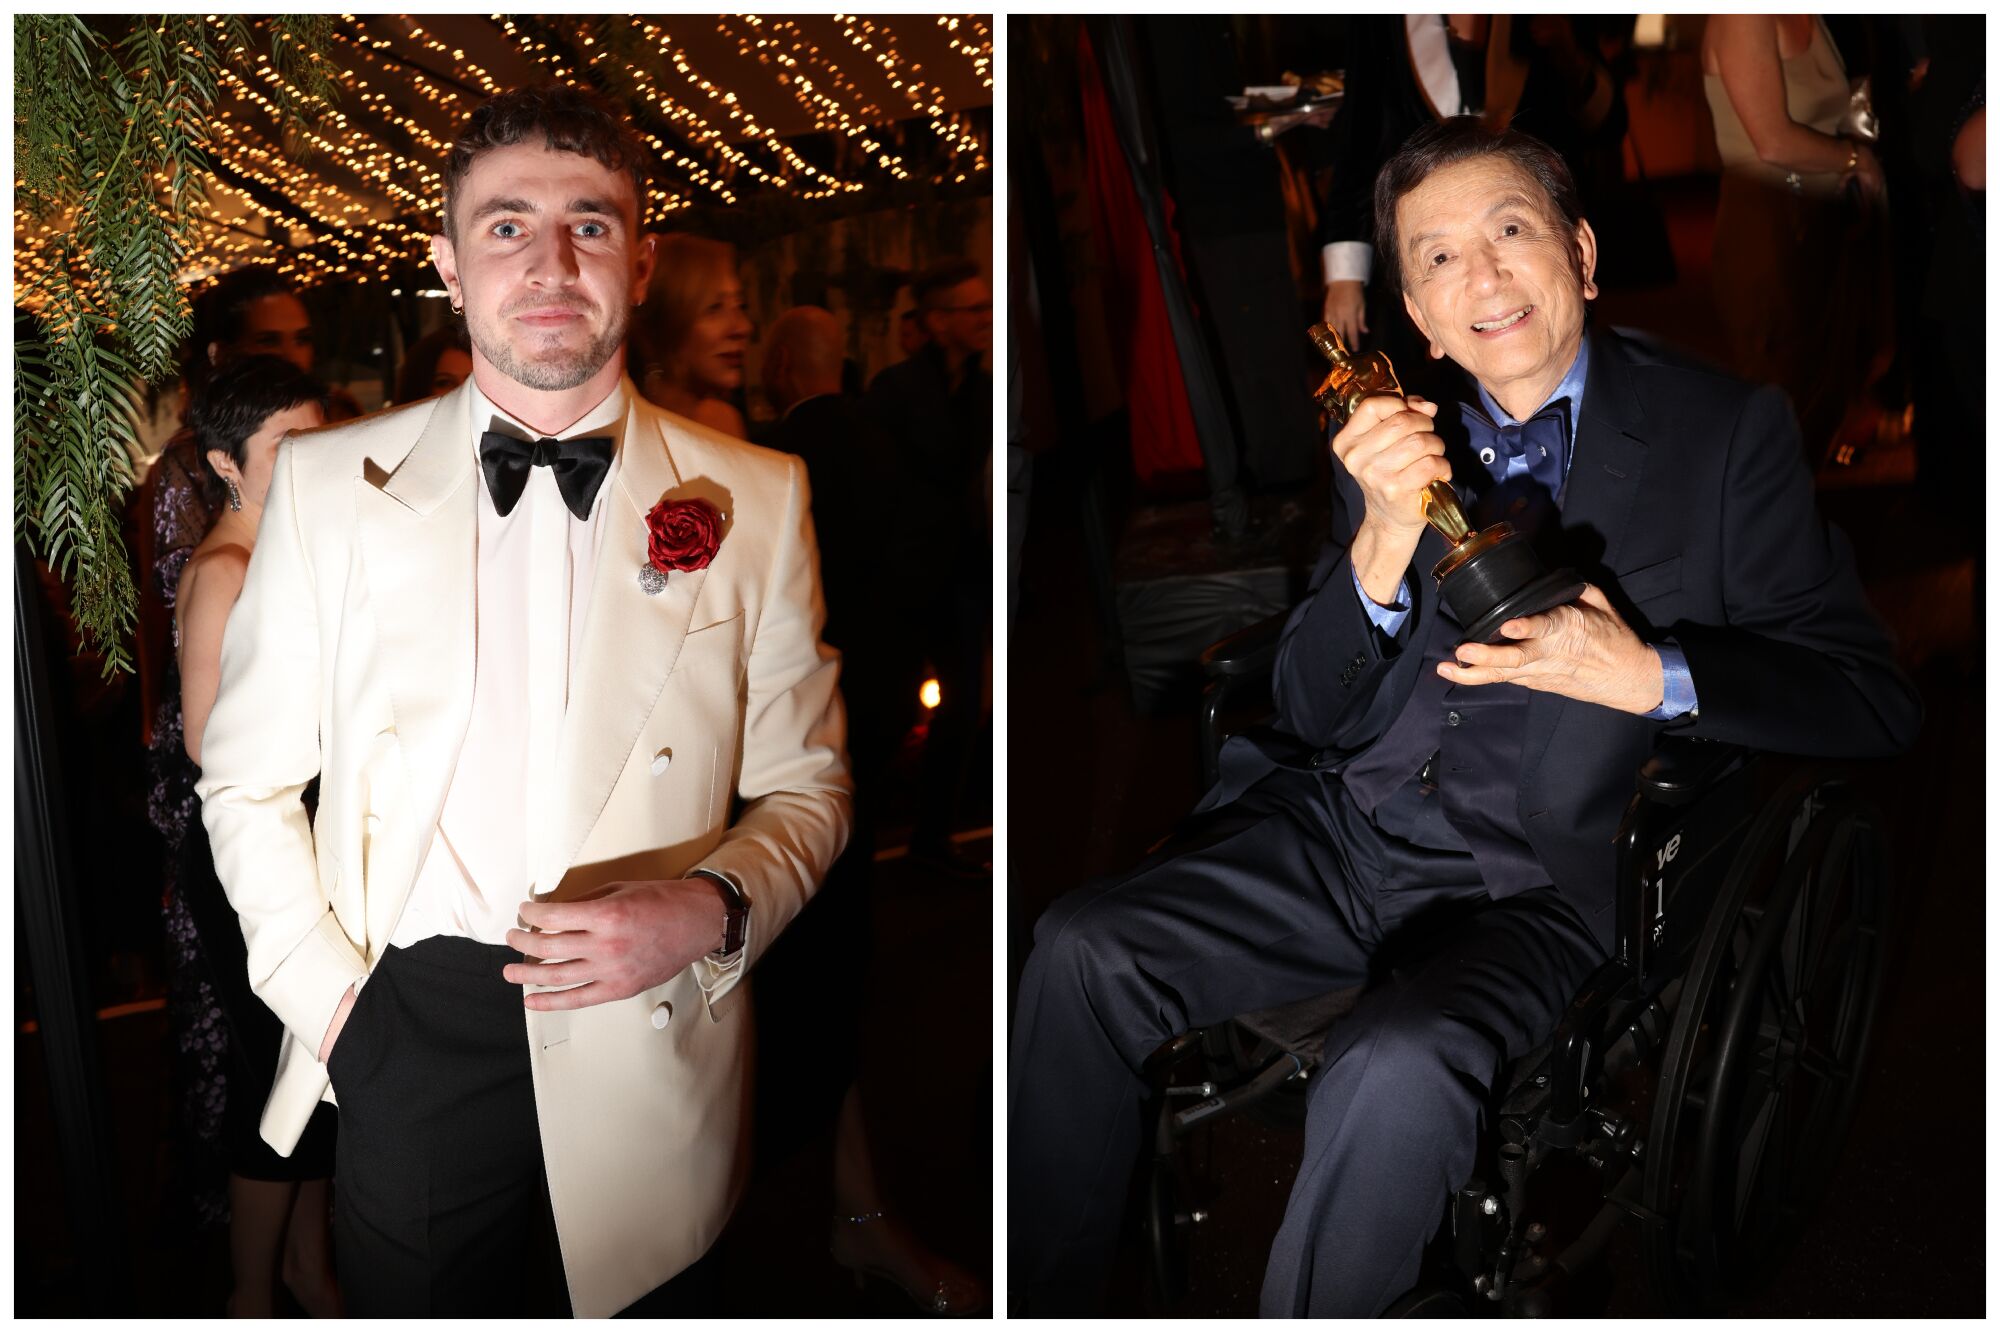 Paul Mescal stands beneath strings of white lights; James Hong clutches an Oscar.